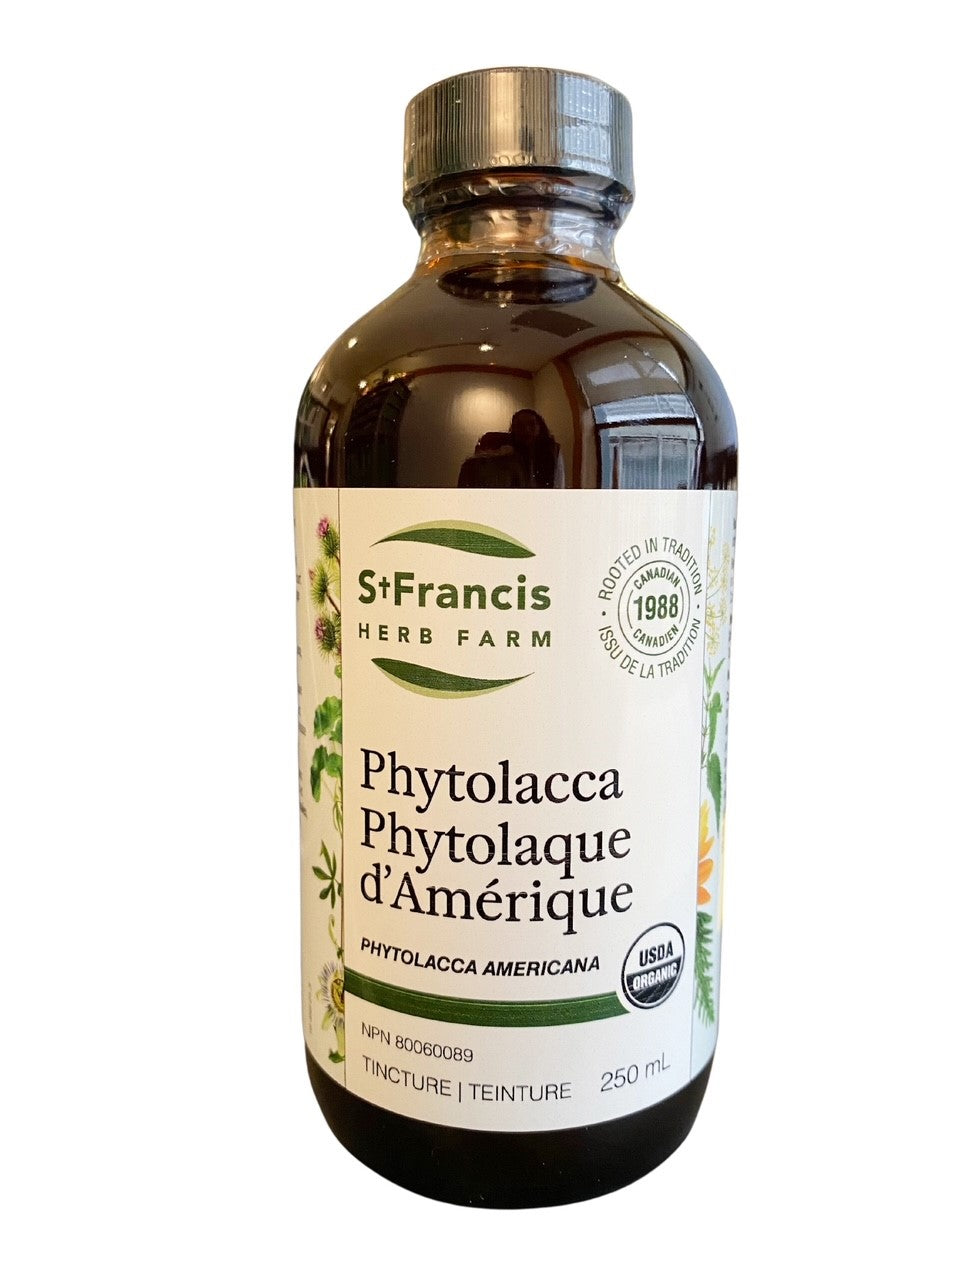 St. Francis Phytolacca 250ml